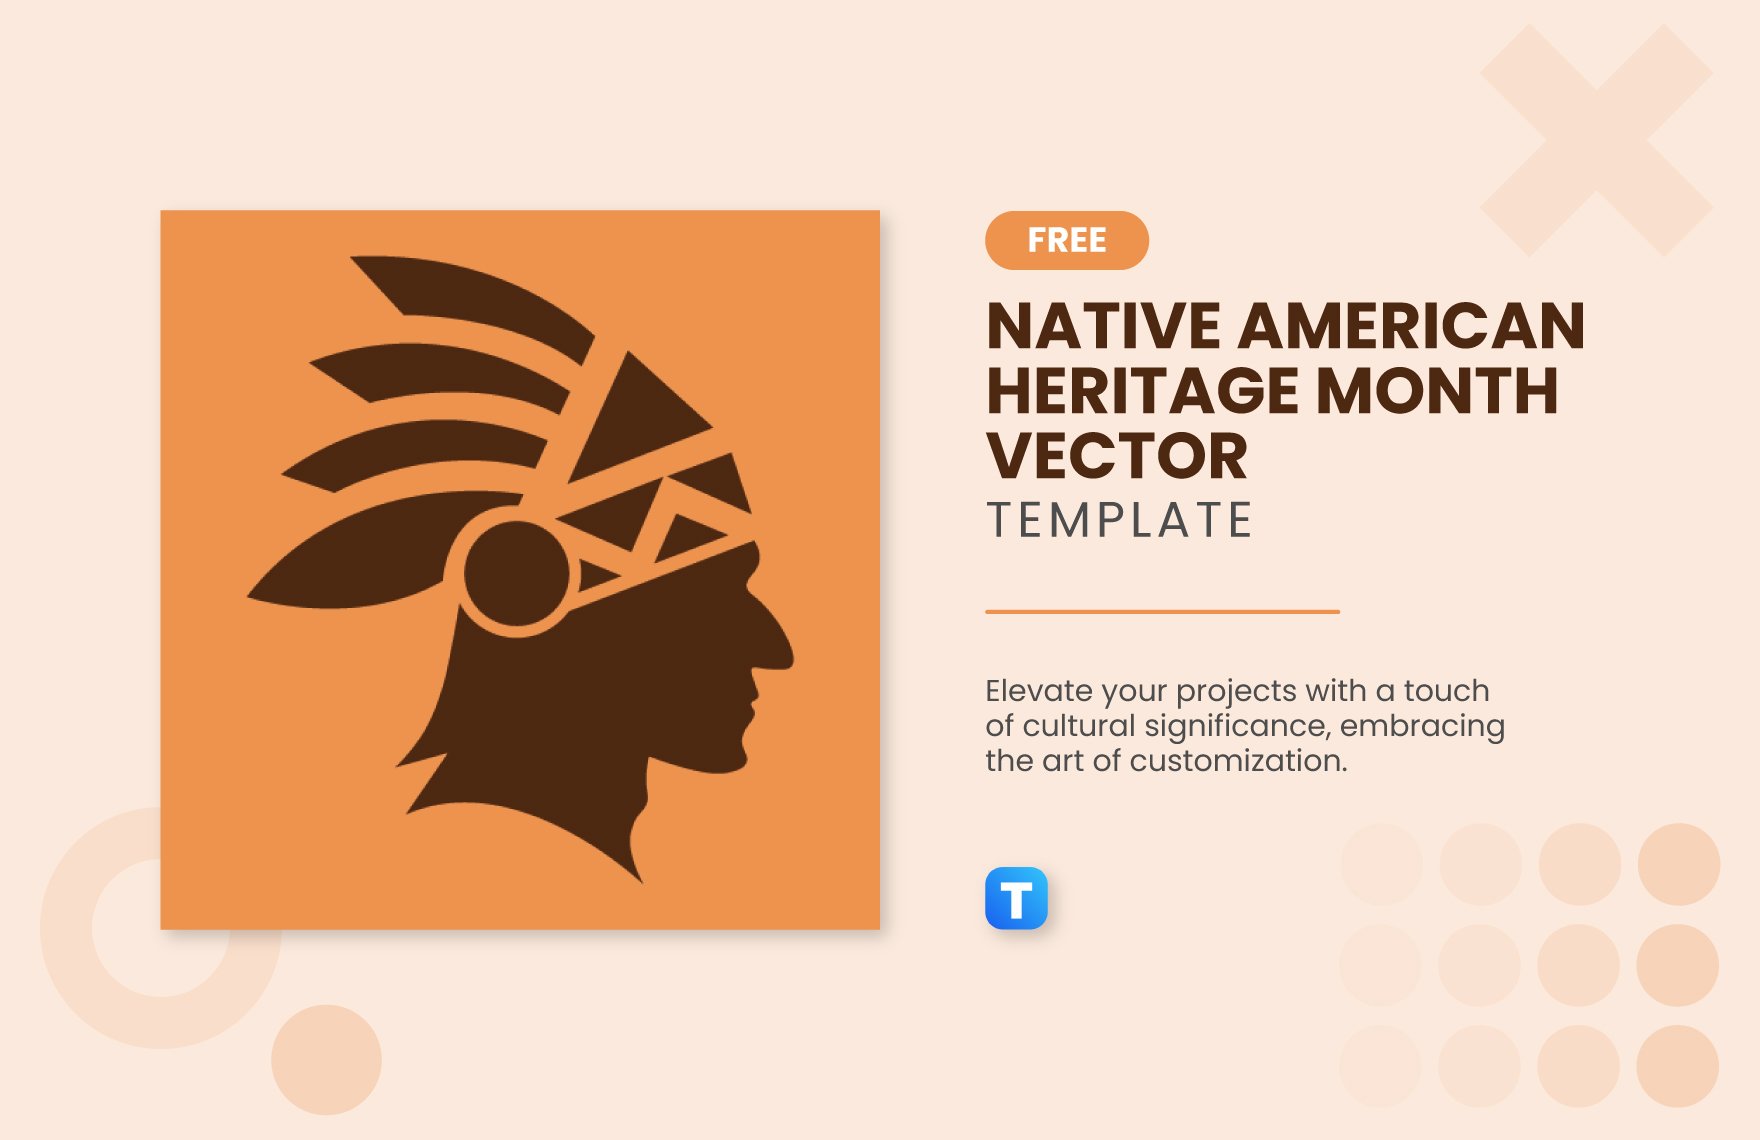 Free Native American Heritage Month Vector Template